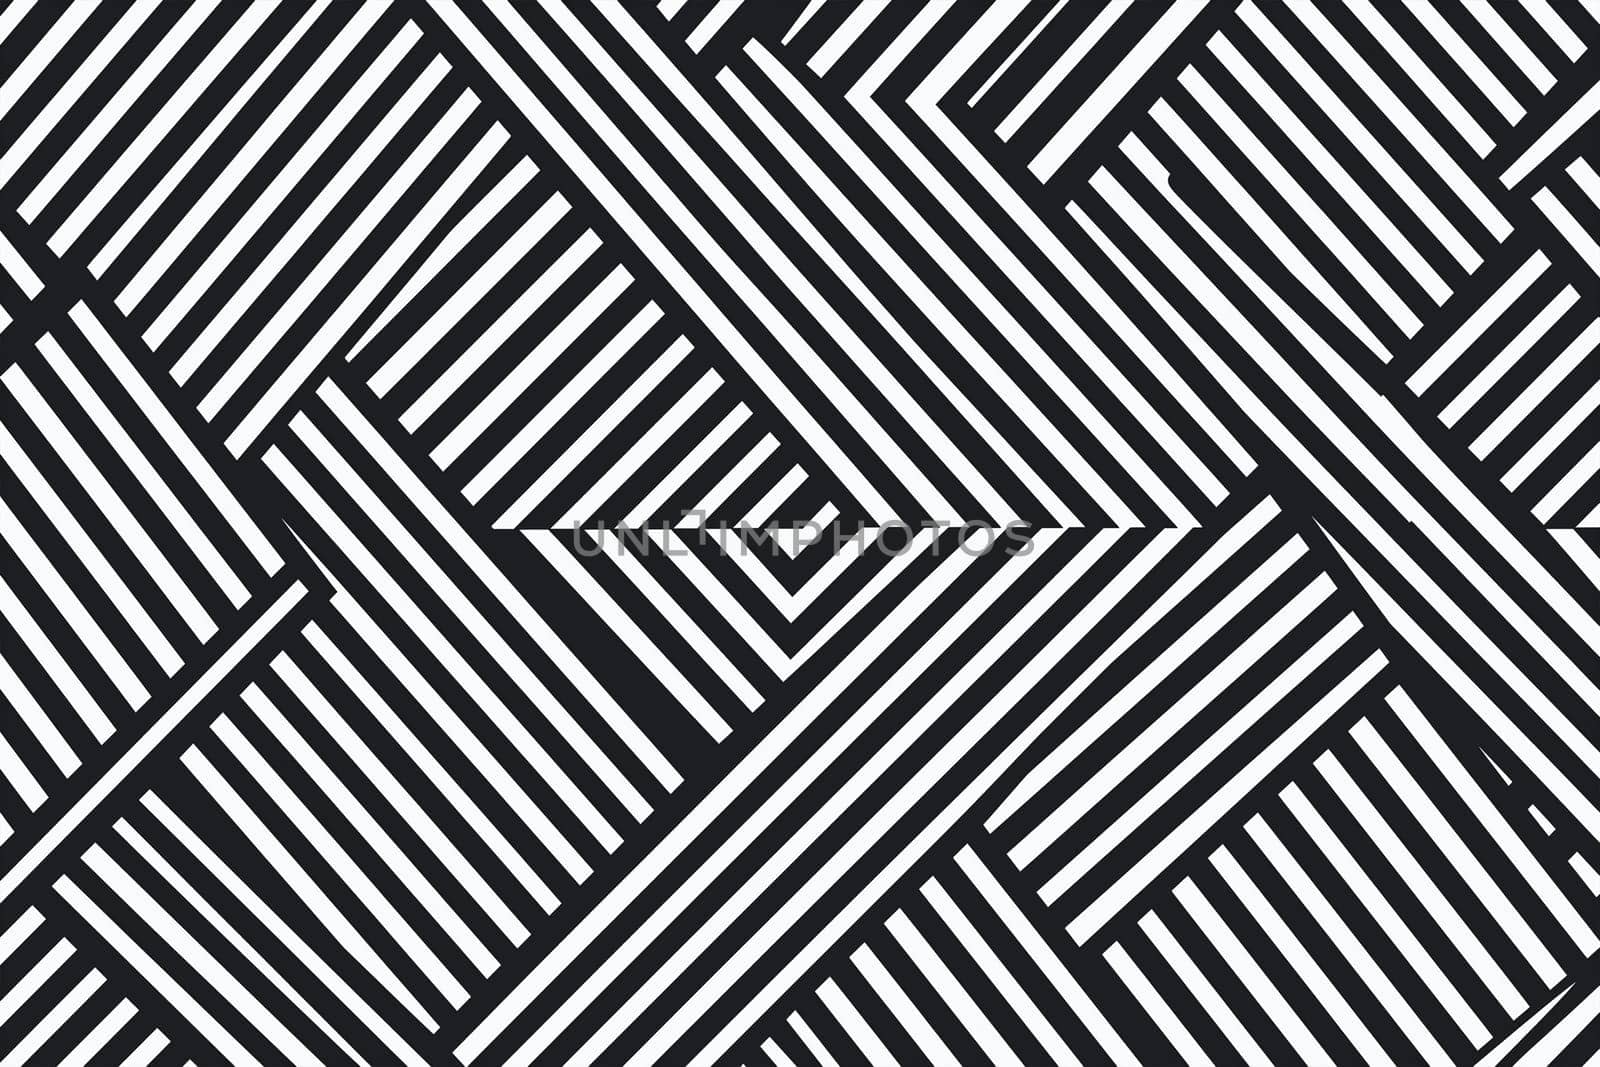 A monochromatic design featuring intersecting lines in a repeating pattern, creating a visually striking black and white composition.